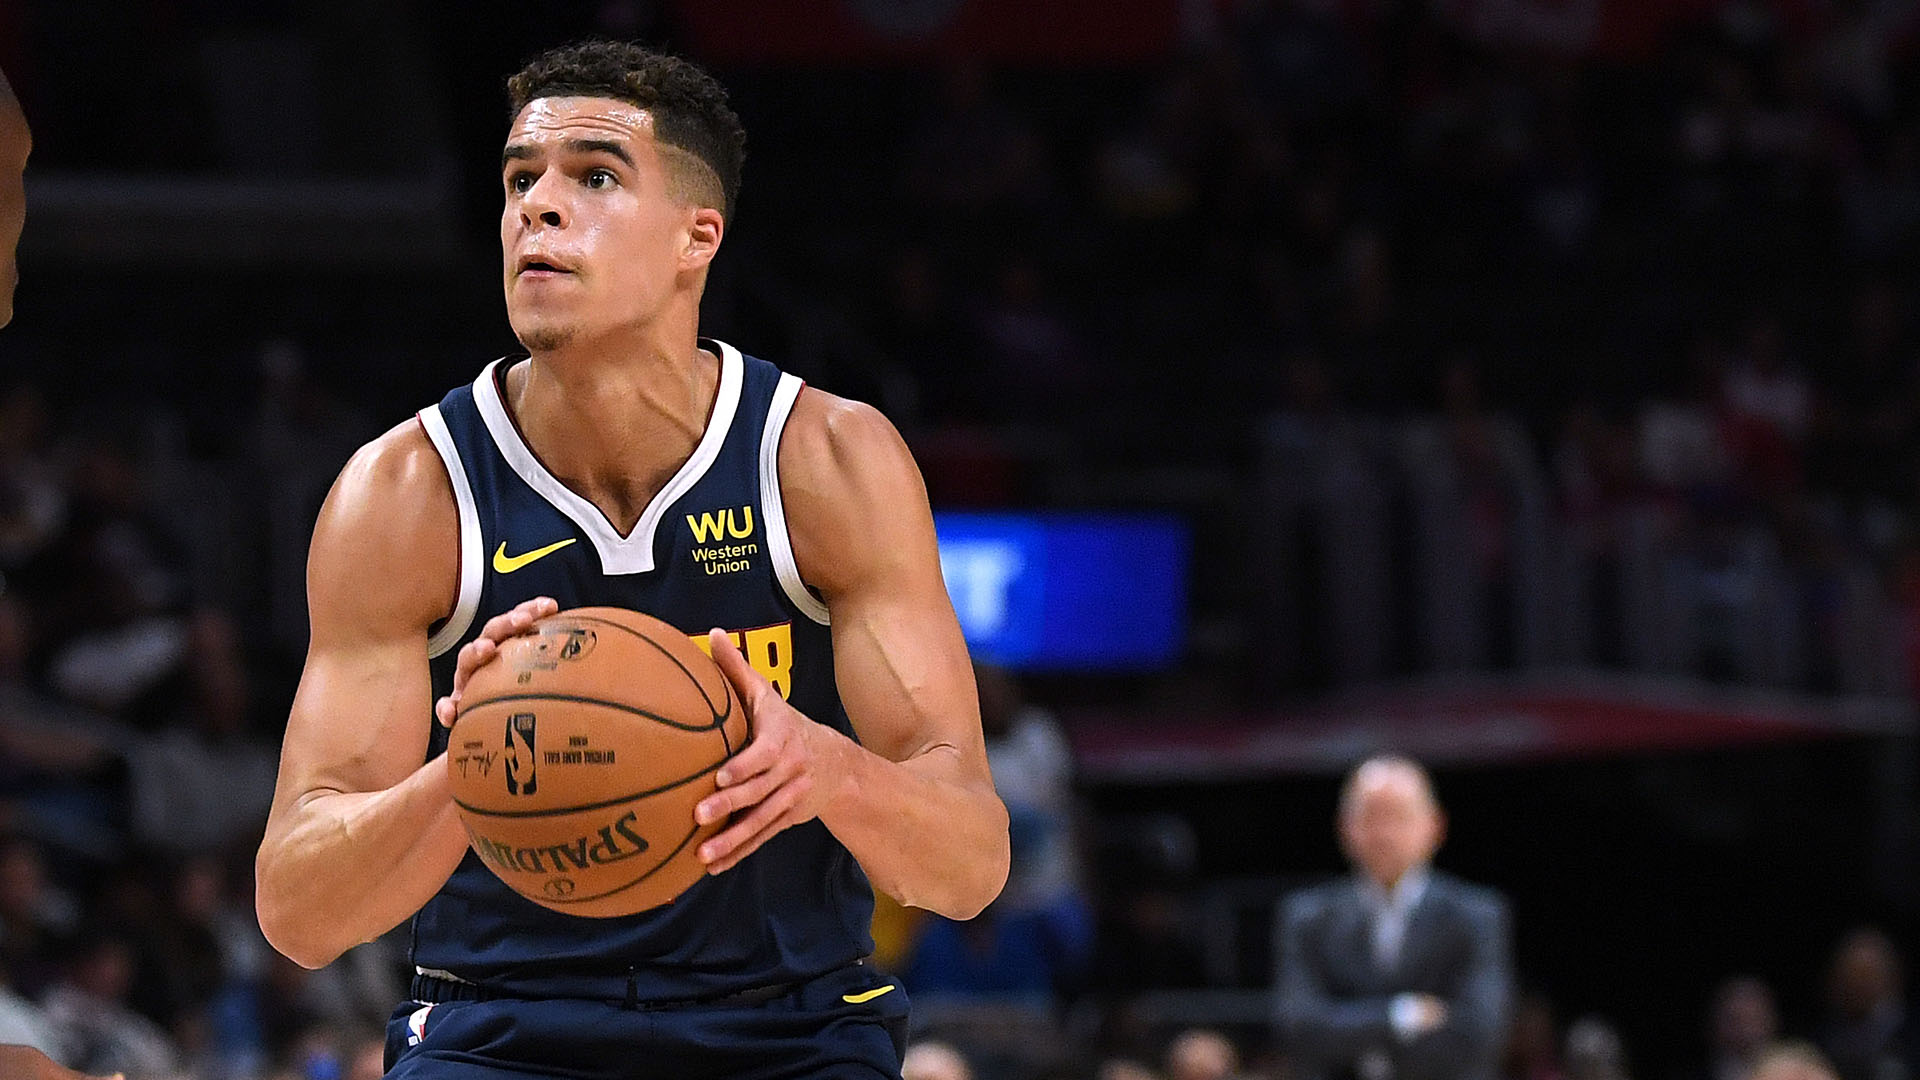 Michael Porter Jr. Says He's Not Anti Vaccine: “What I'm Against Is Not Allowing Other People To Have A Choice”